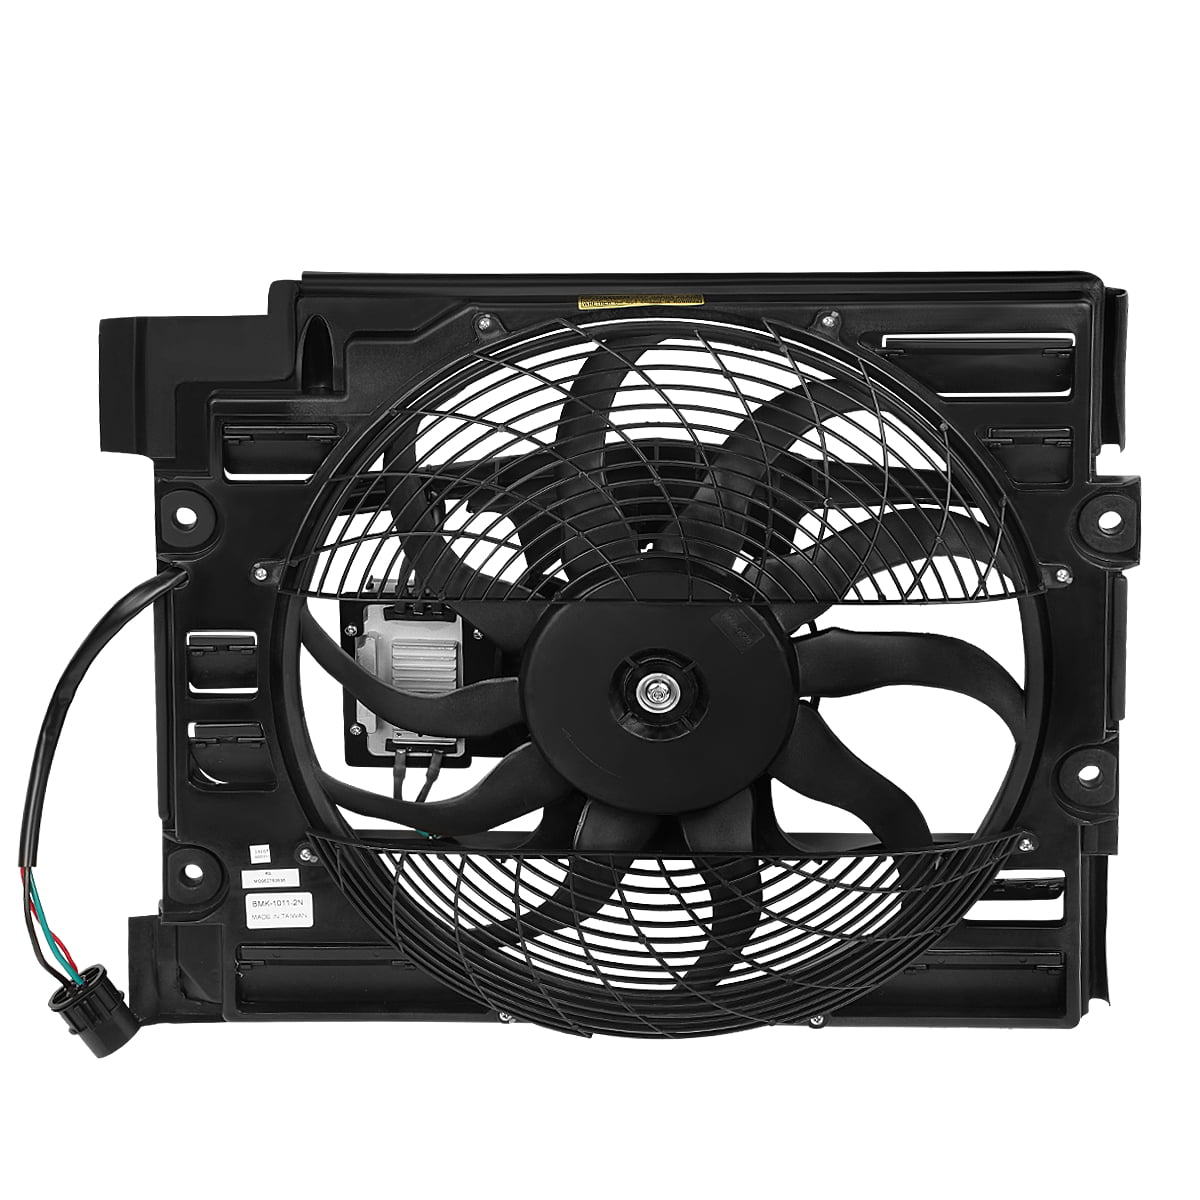 A-Premium Radiator Cooling Fan Assembly with Controller Replacement for BMW 525i 528i 530i 540i M5 1999-2003 